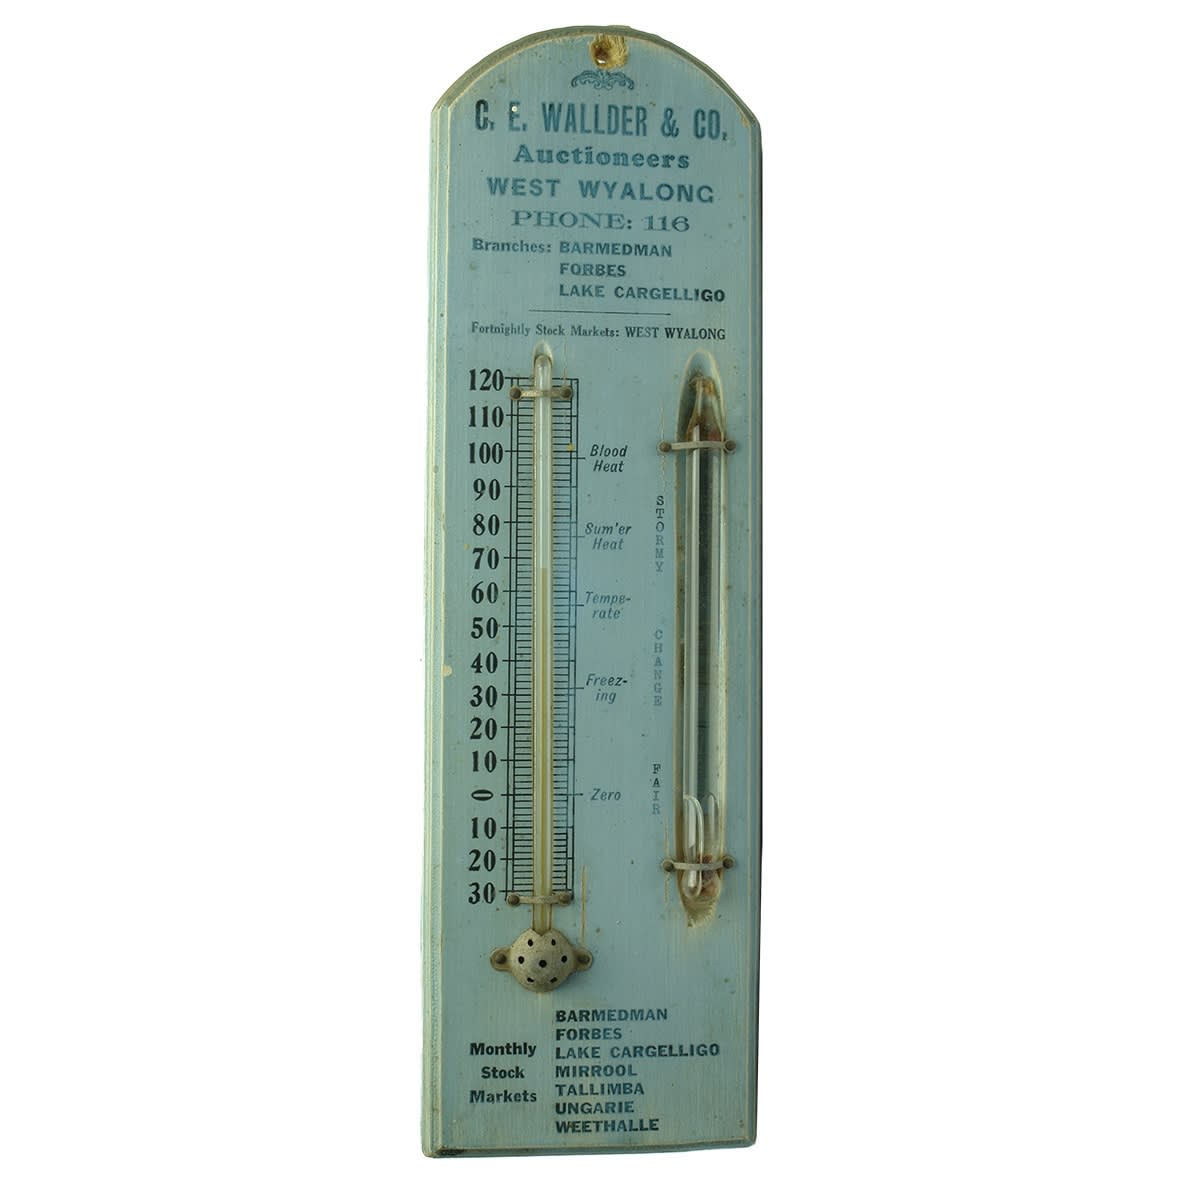 Advertising Thermometer. C. E. Wallder & Co., Auctioneers, West Wyalong, Barmedman, Forbes, Lake Cargellico. (New South Wales)